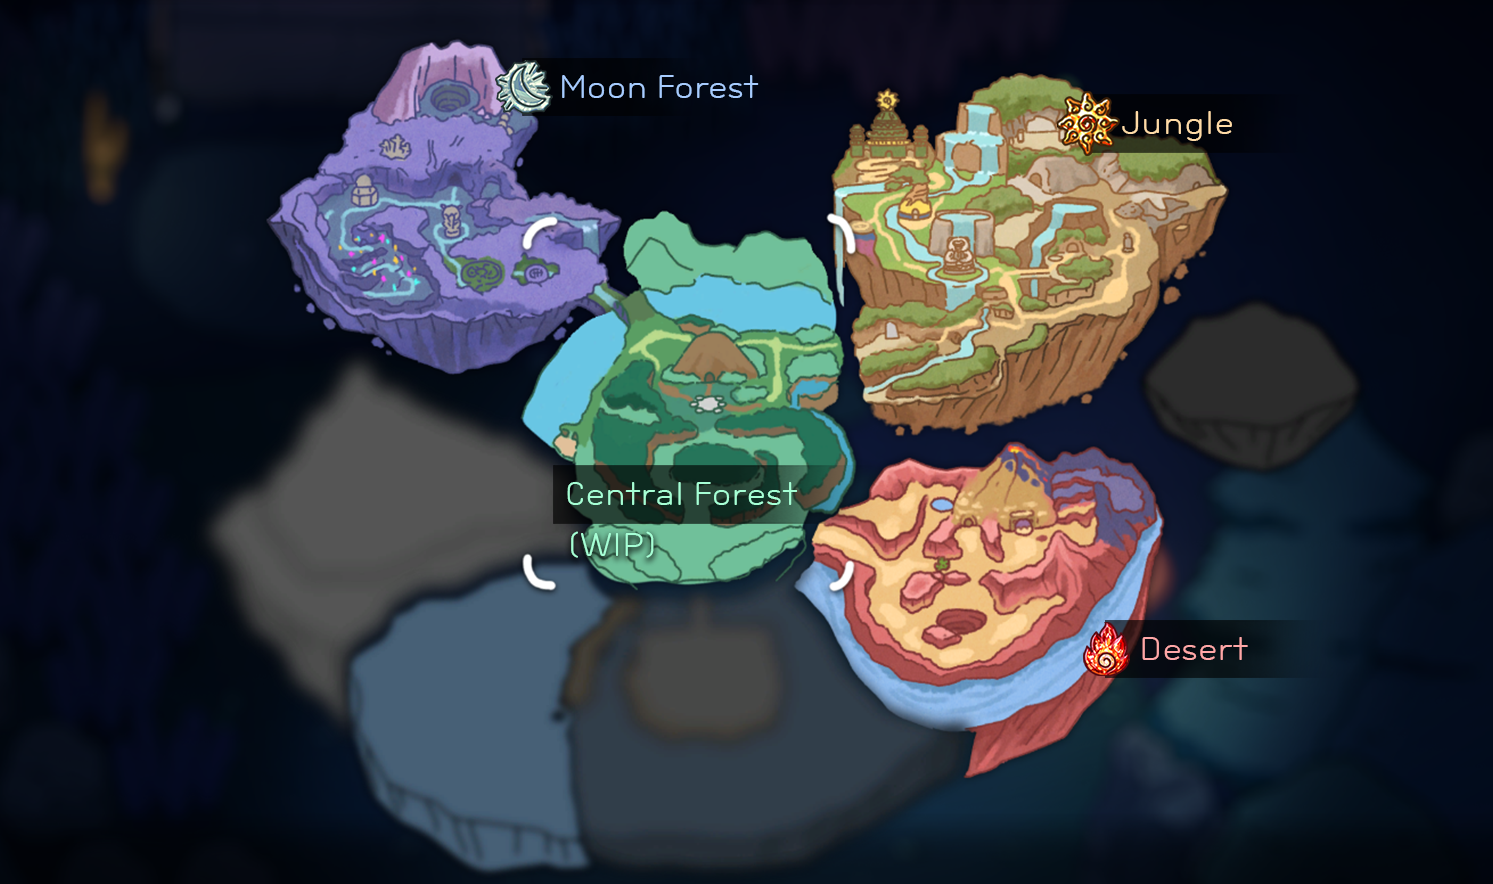 Early Access Launch! · Ogu and the Secret Forest update for 24 March 2023 ·  SteamDB